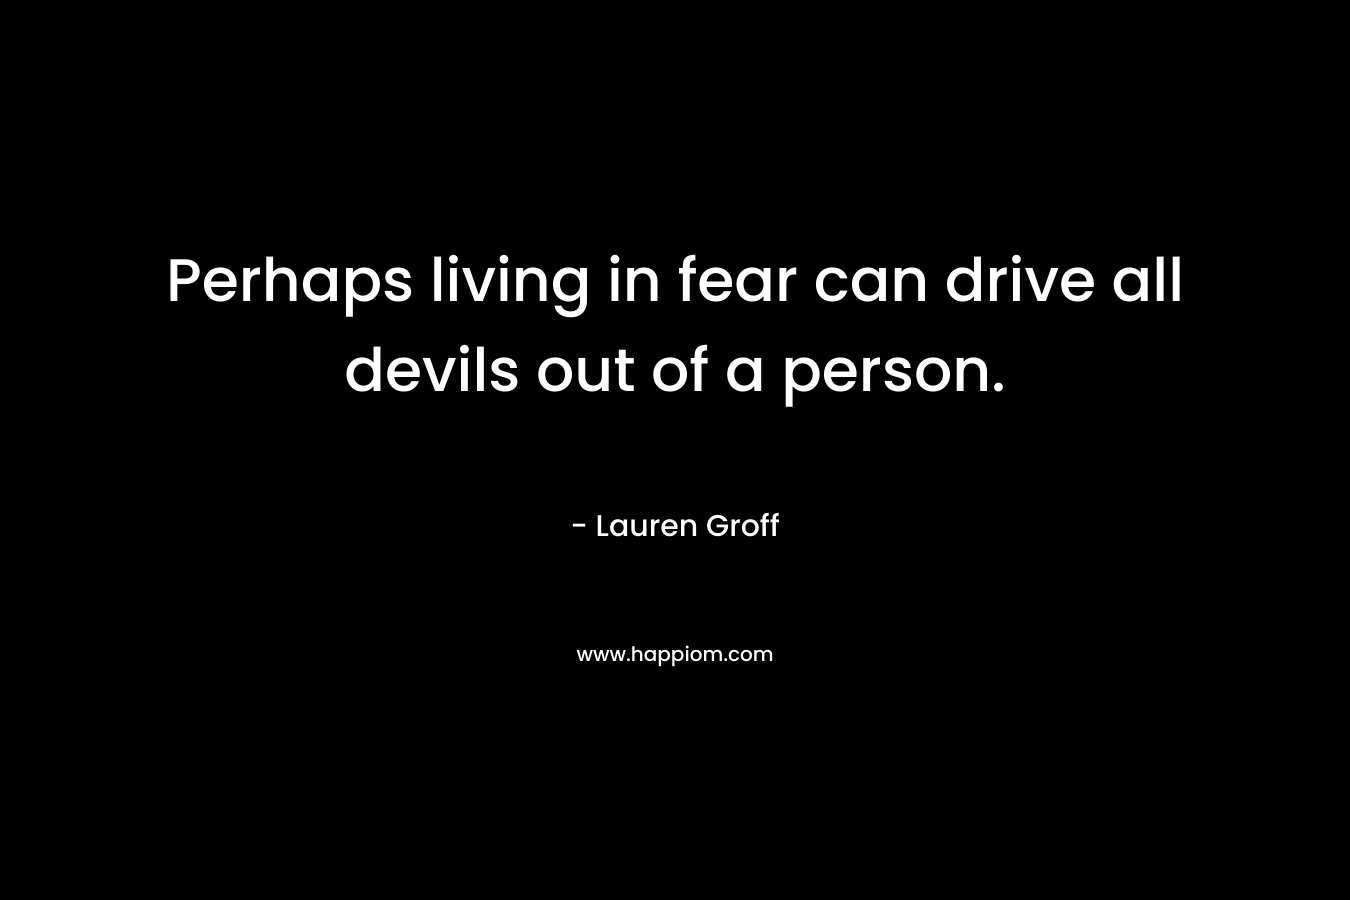 Perhaps living in fear can drive all devils out of a person.